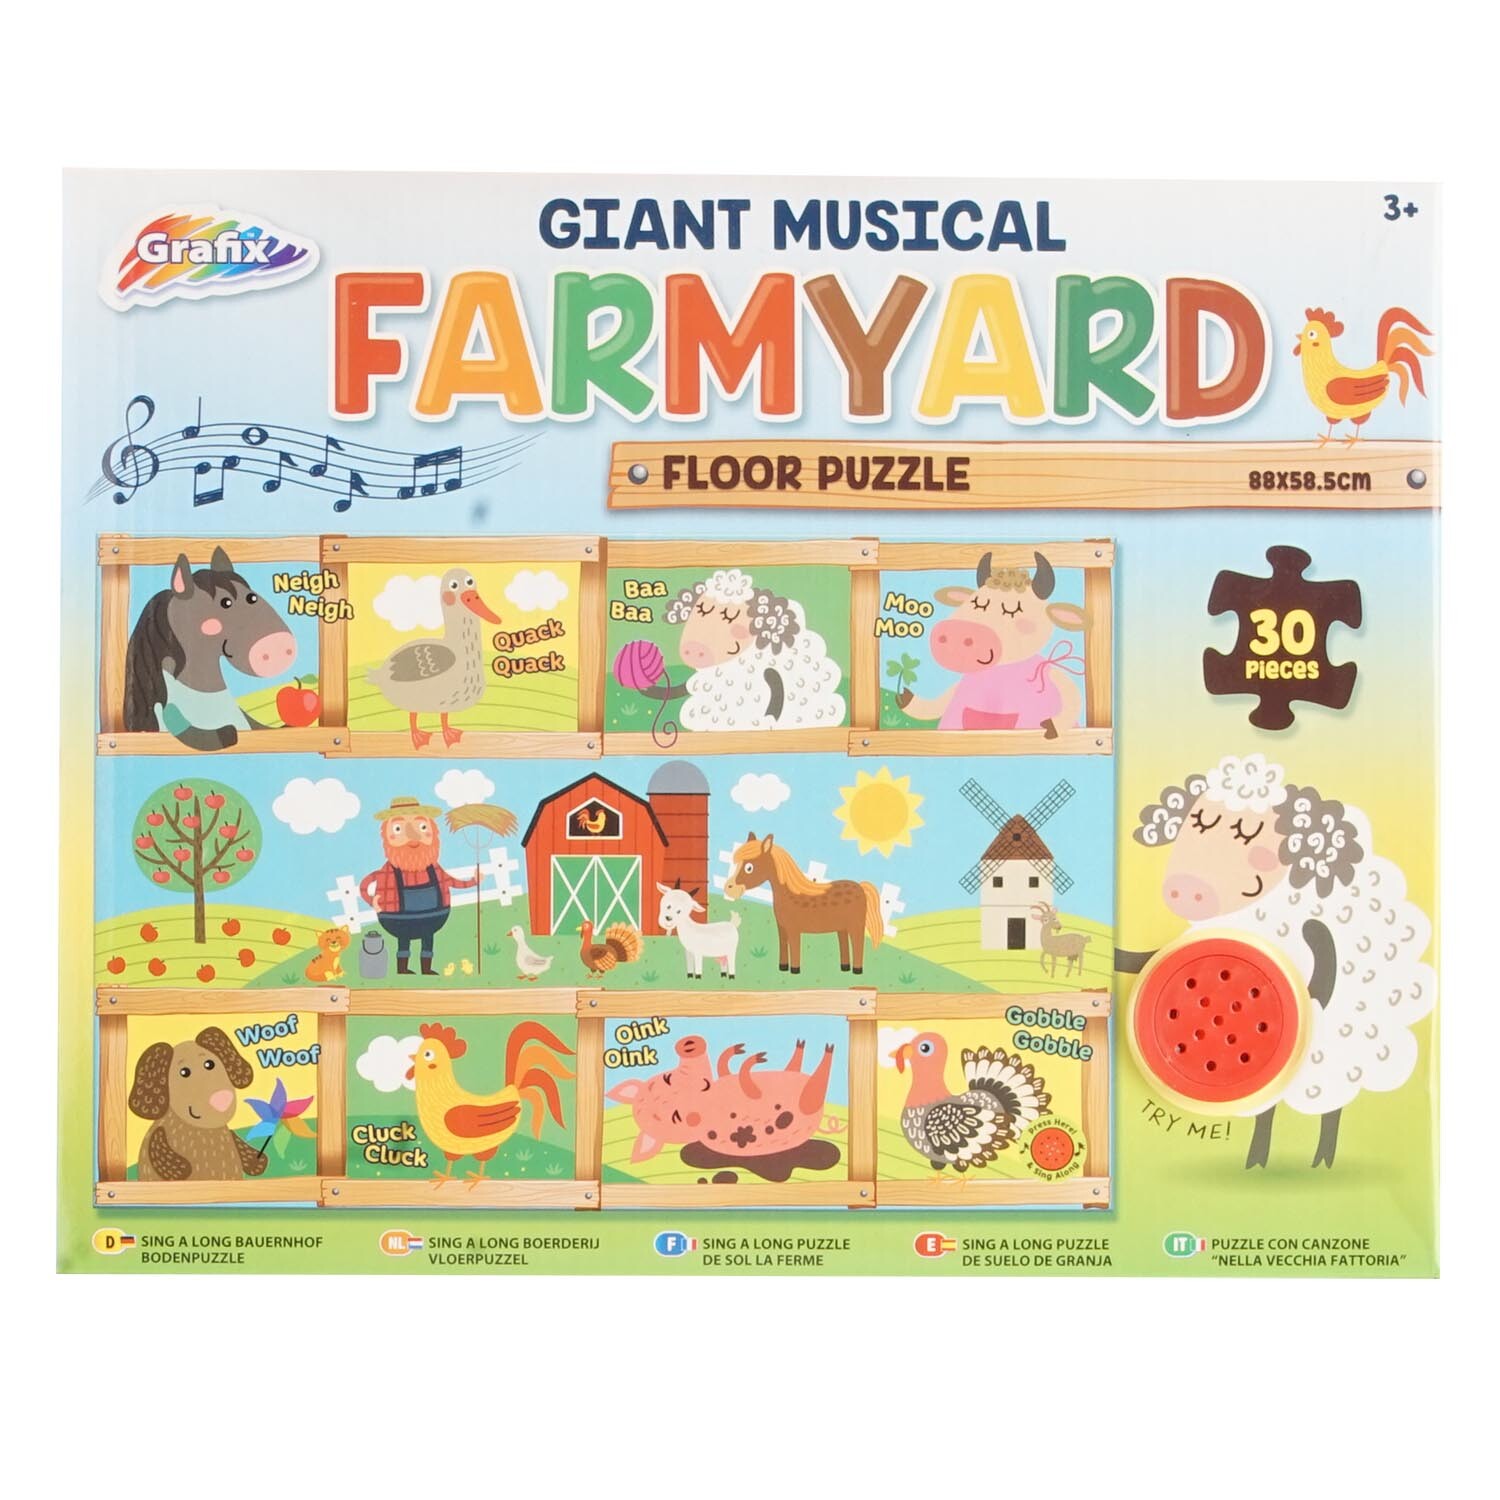 Giant Musical Farmyard Floor Puzzle Image 1